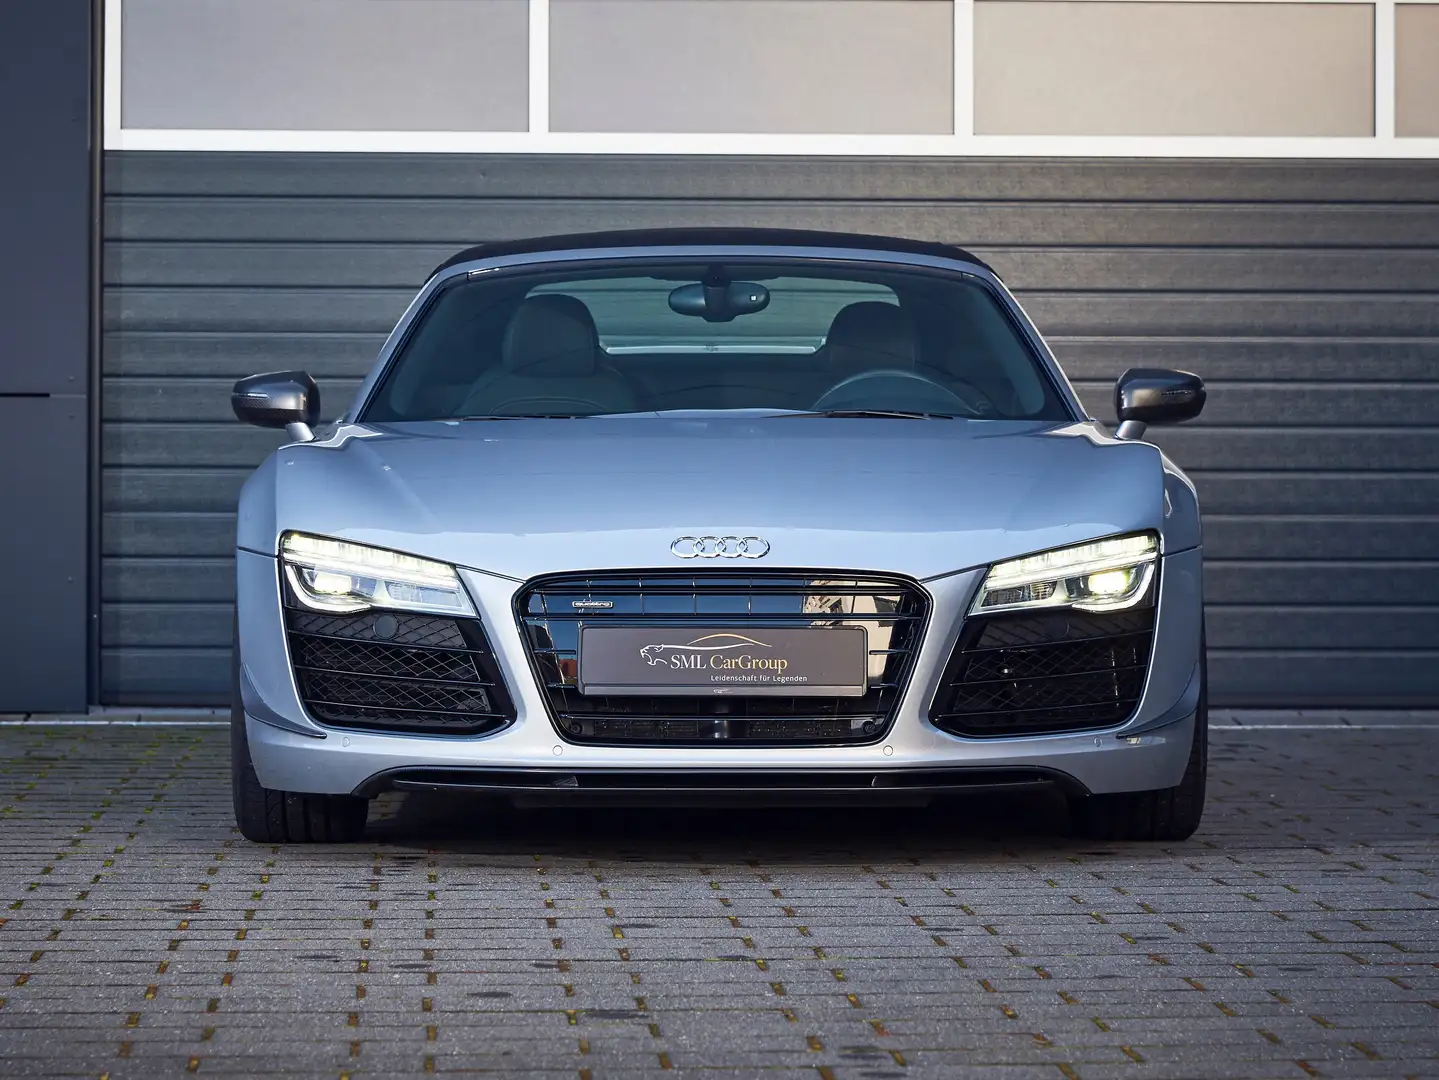 Audi R8 5.2 Spyder - Limited LeMans Edition - No. 01 of 30 Silber - 2